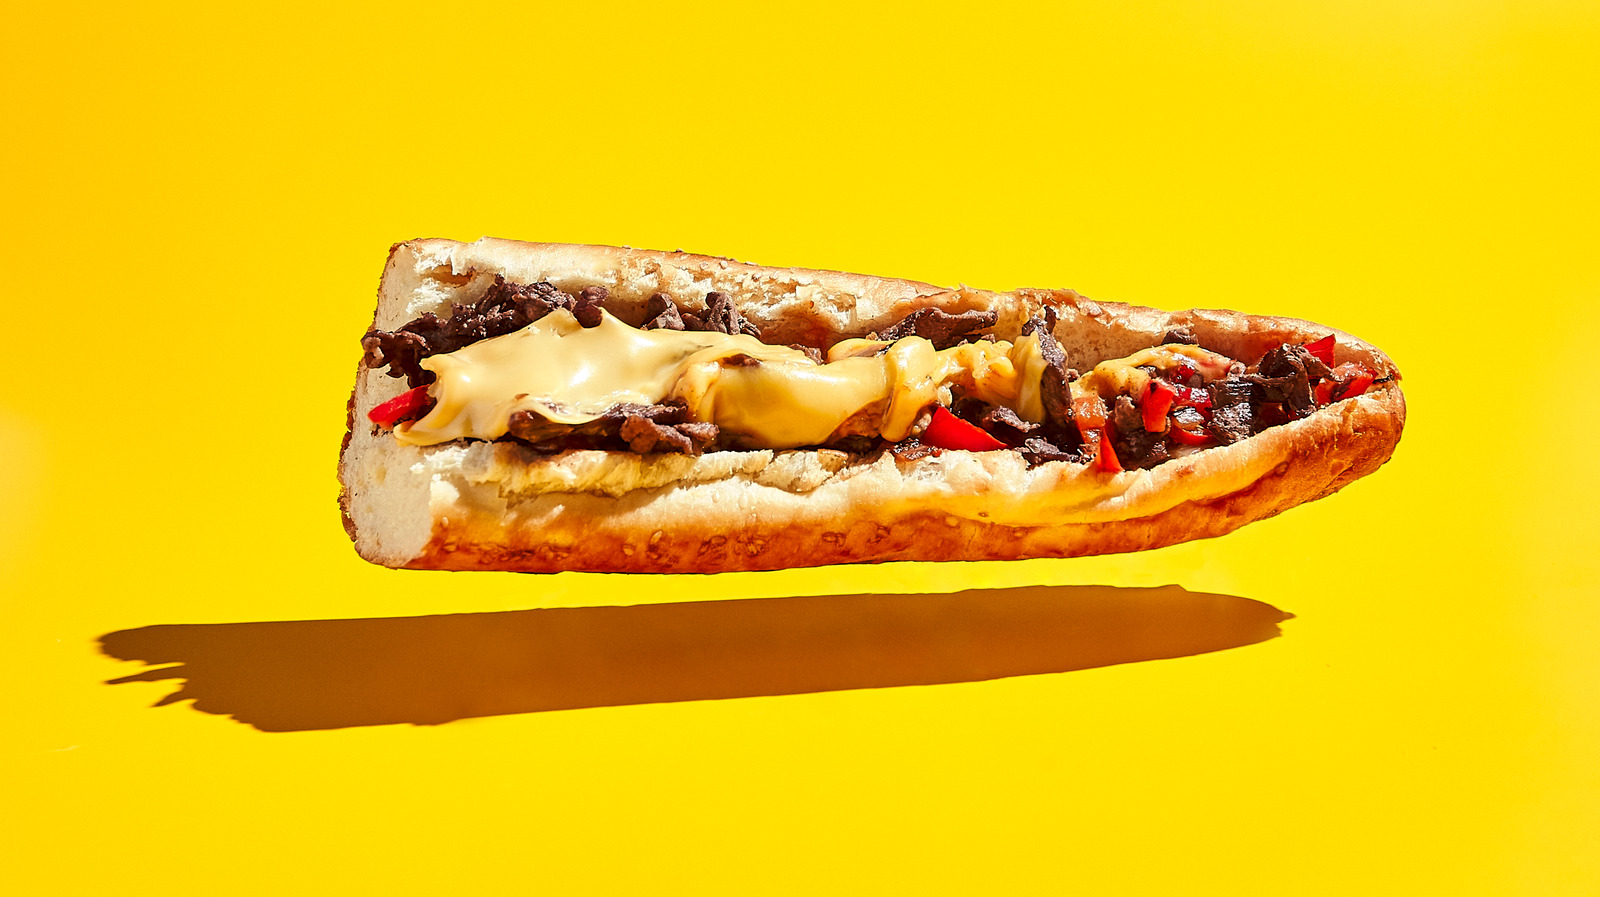 LOOK: The World's Longest Cheesesteak is Officially from Philly